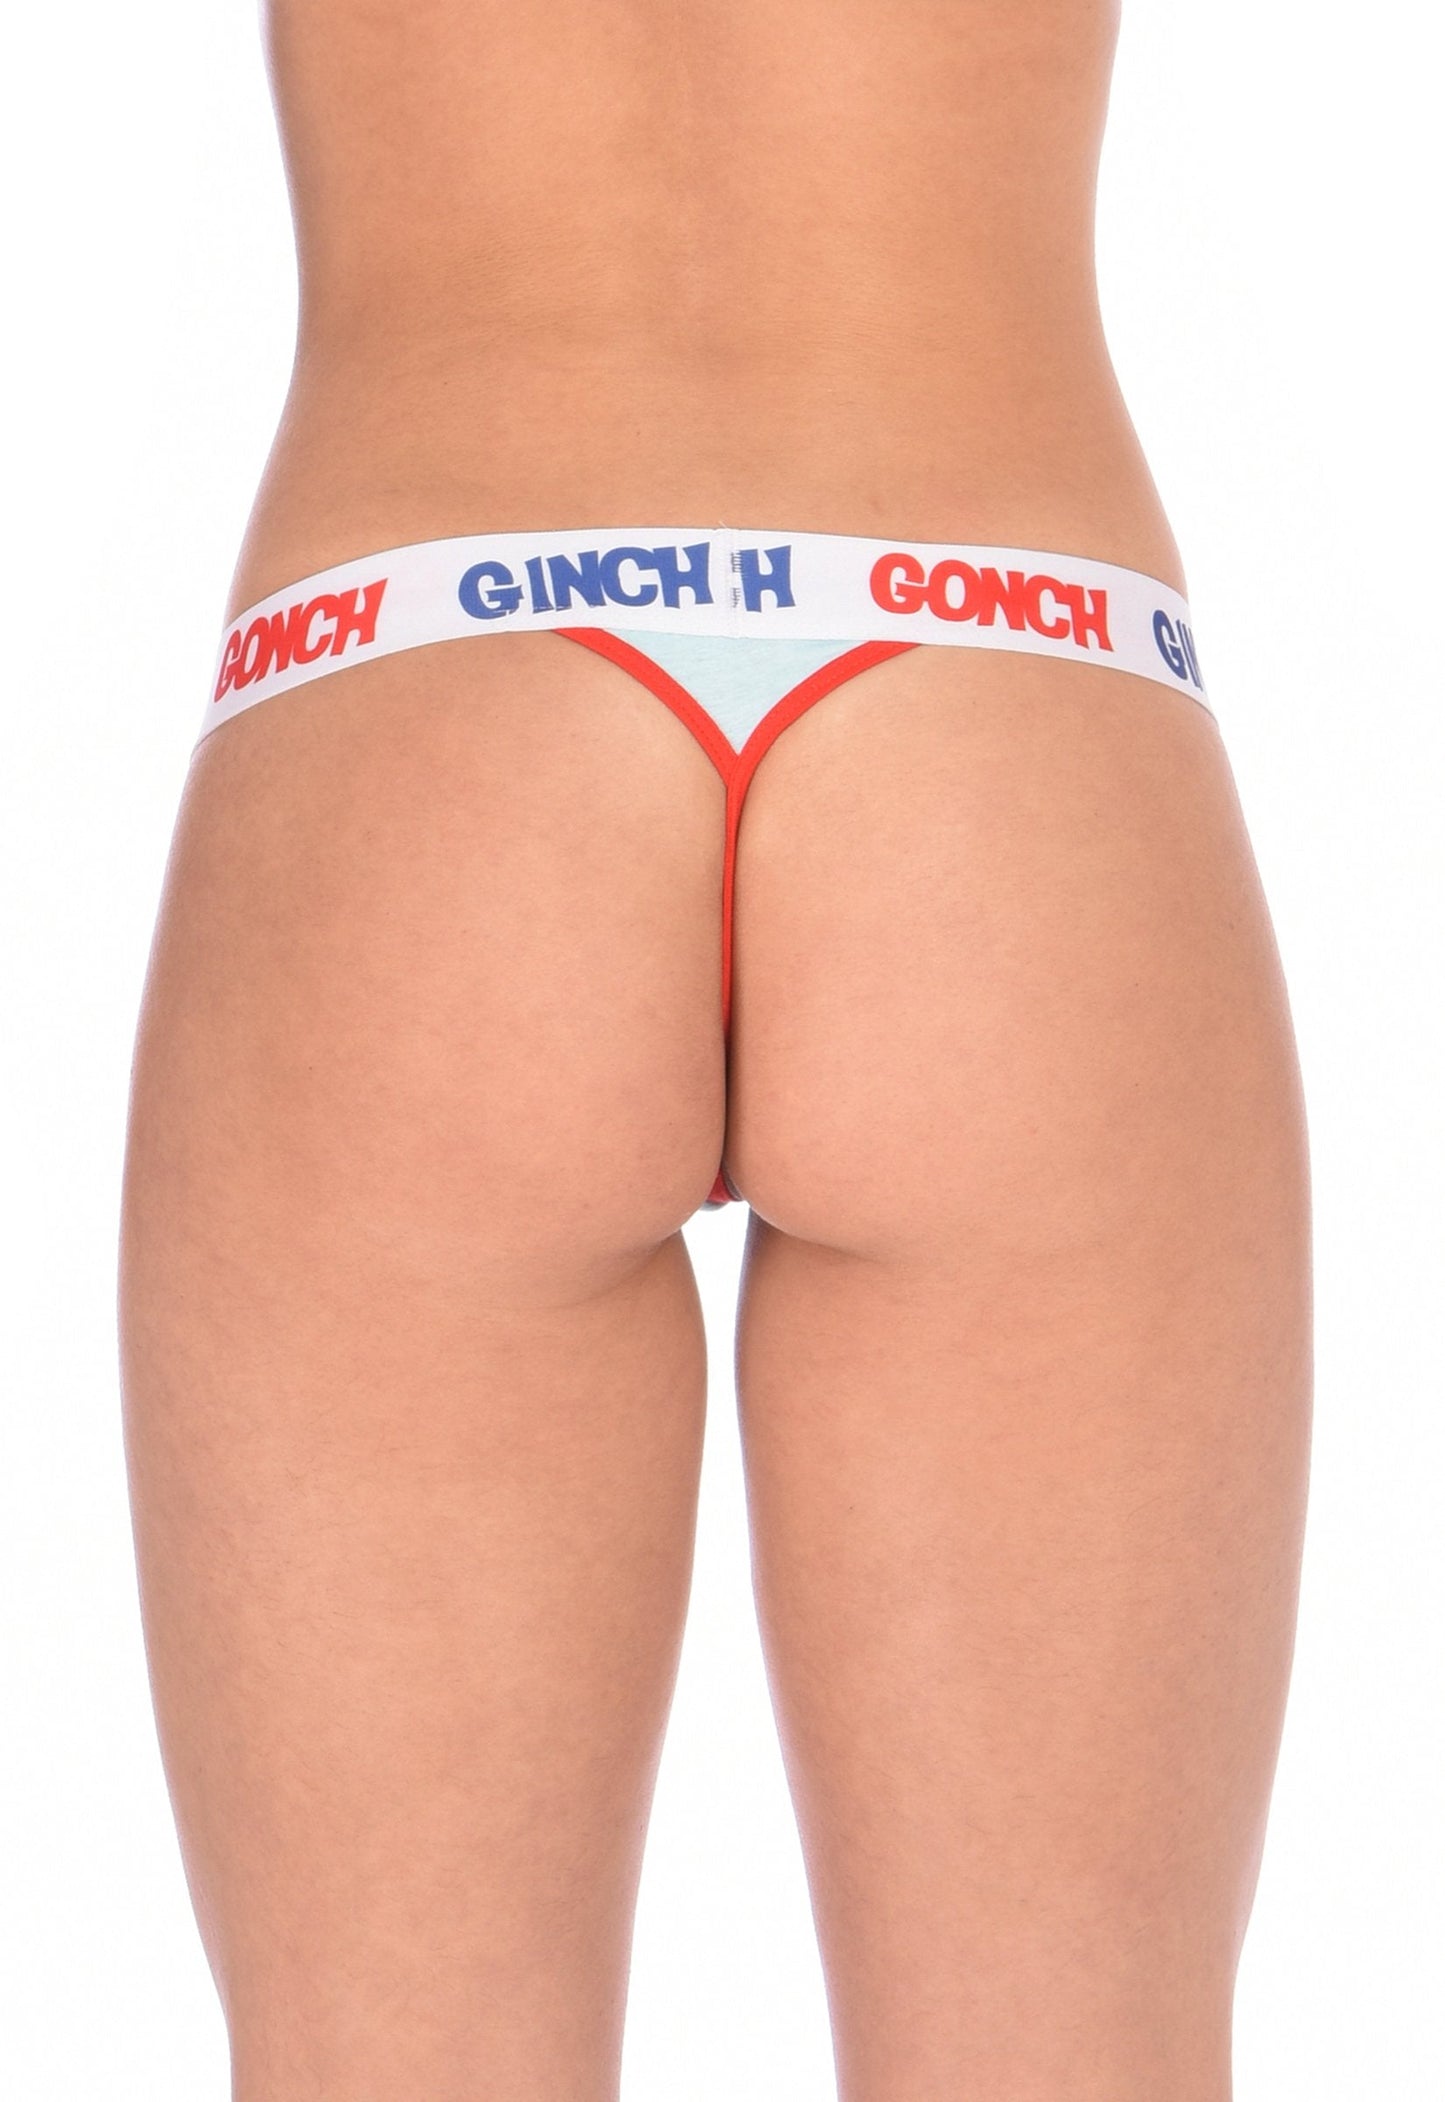 GG Ginch Gonch I Love Paris thong -  women's Underwear white fabric with white printed waistband front